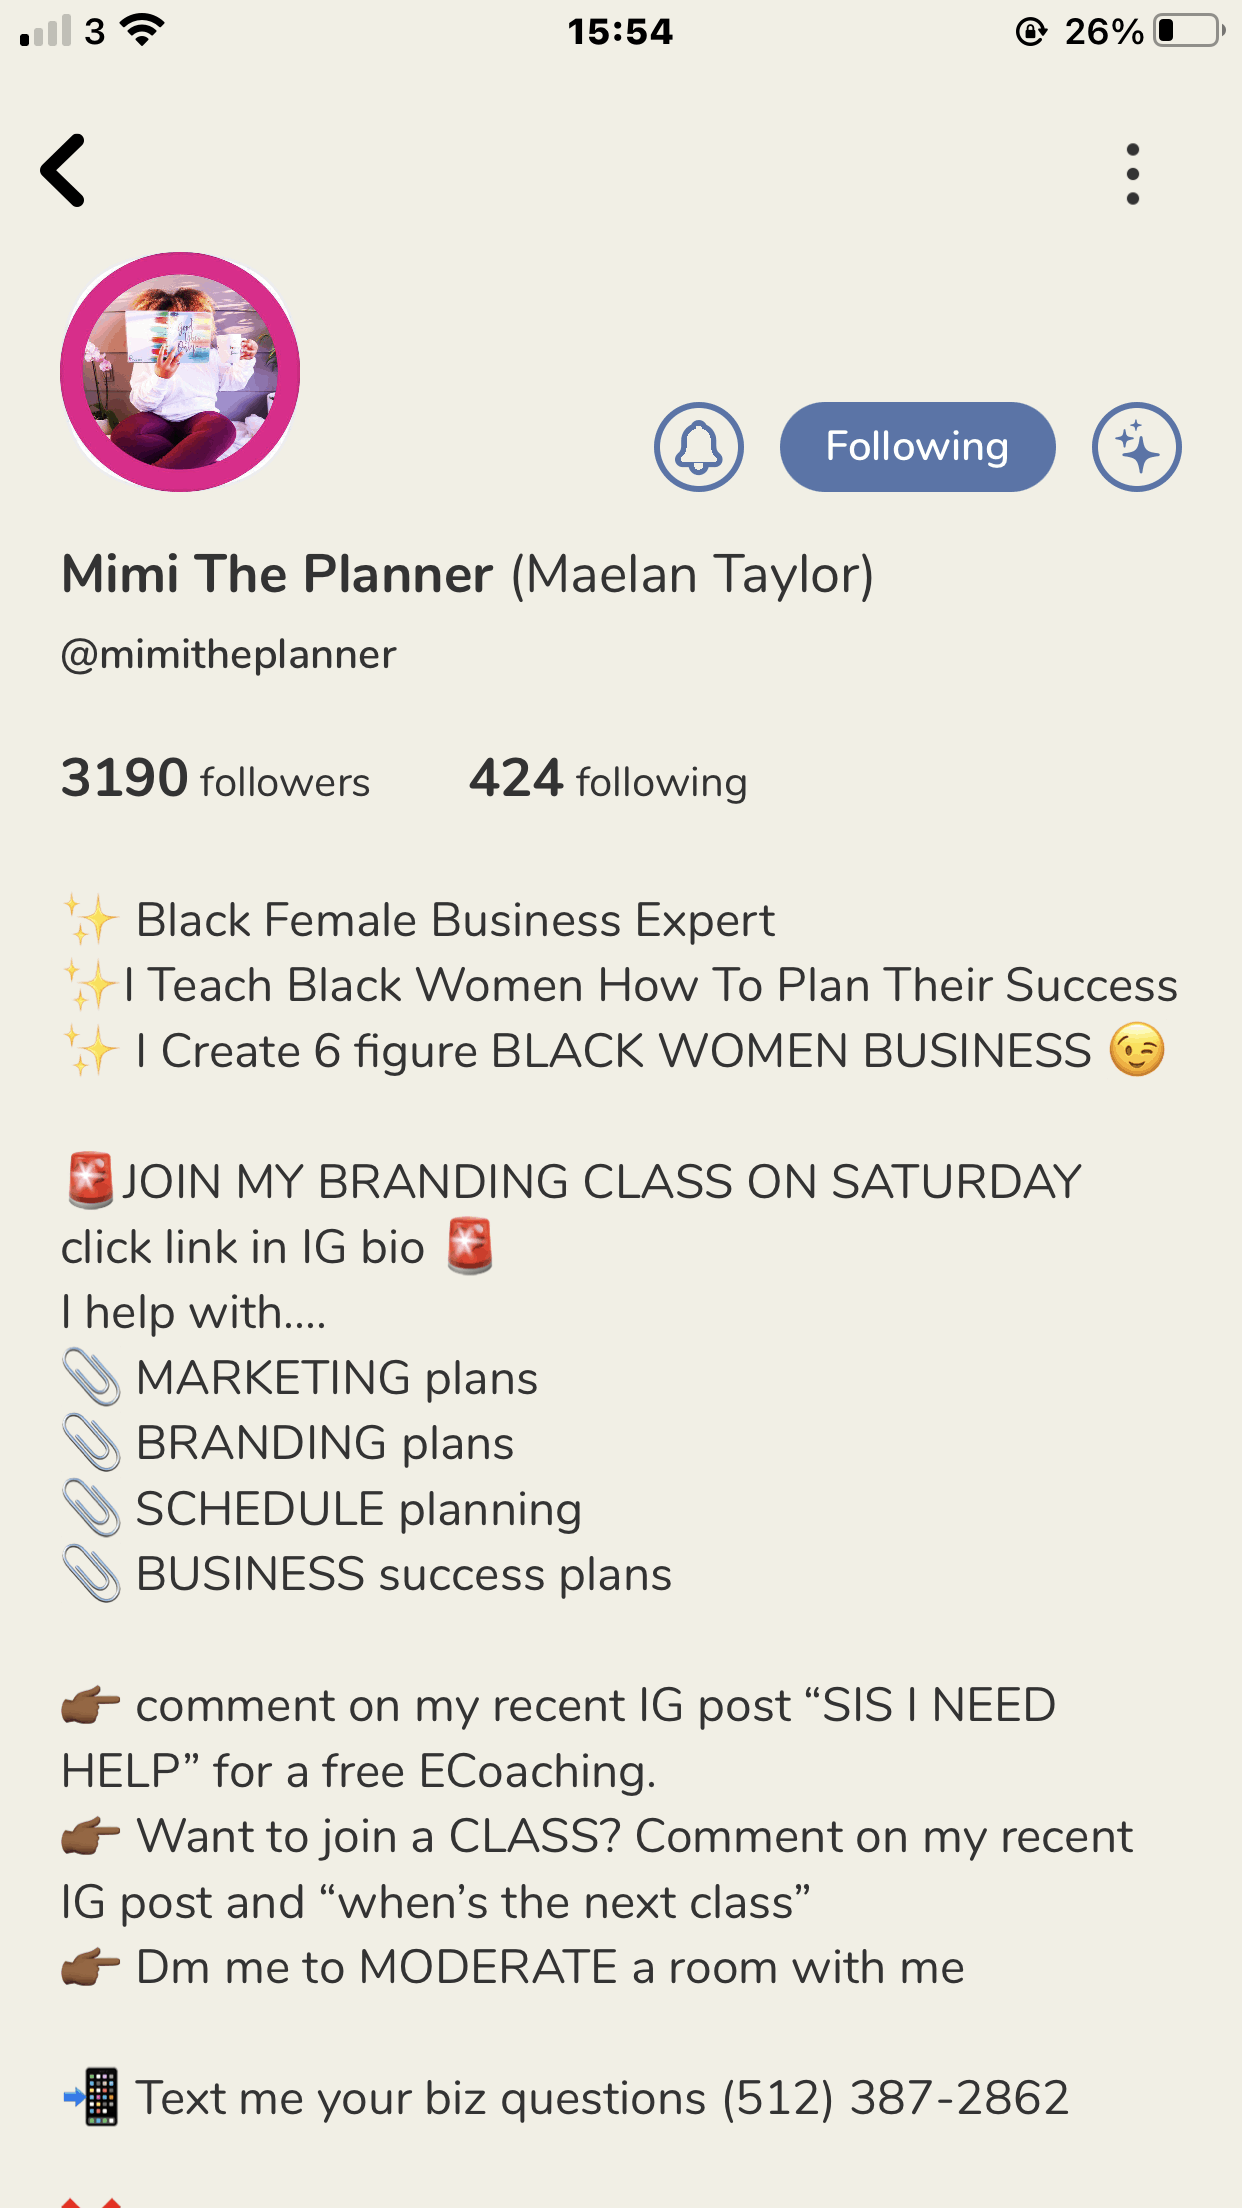 Mimi the Planner's clubhouse profile